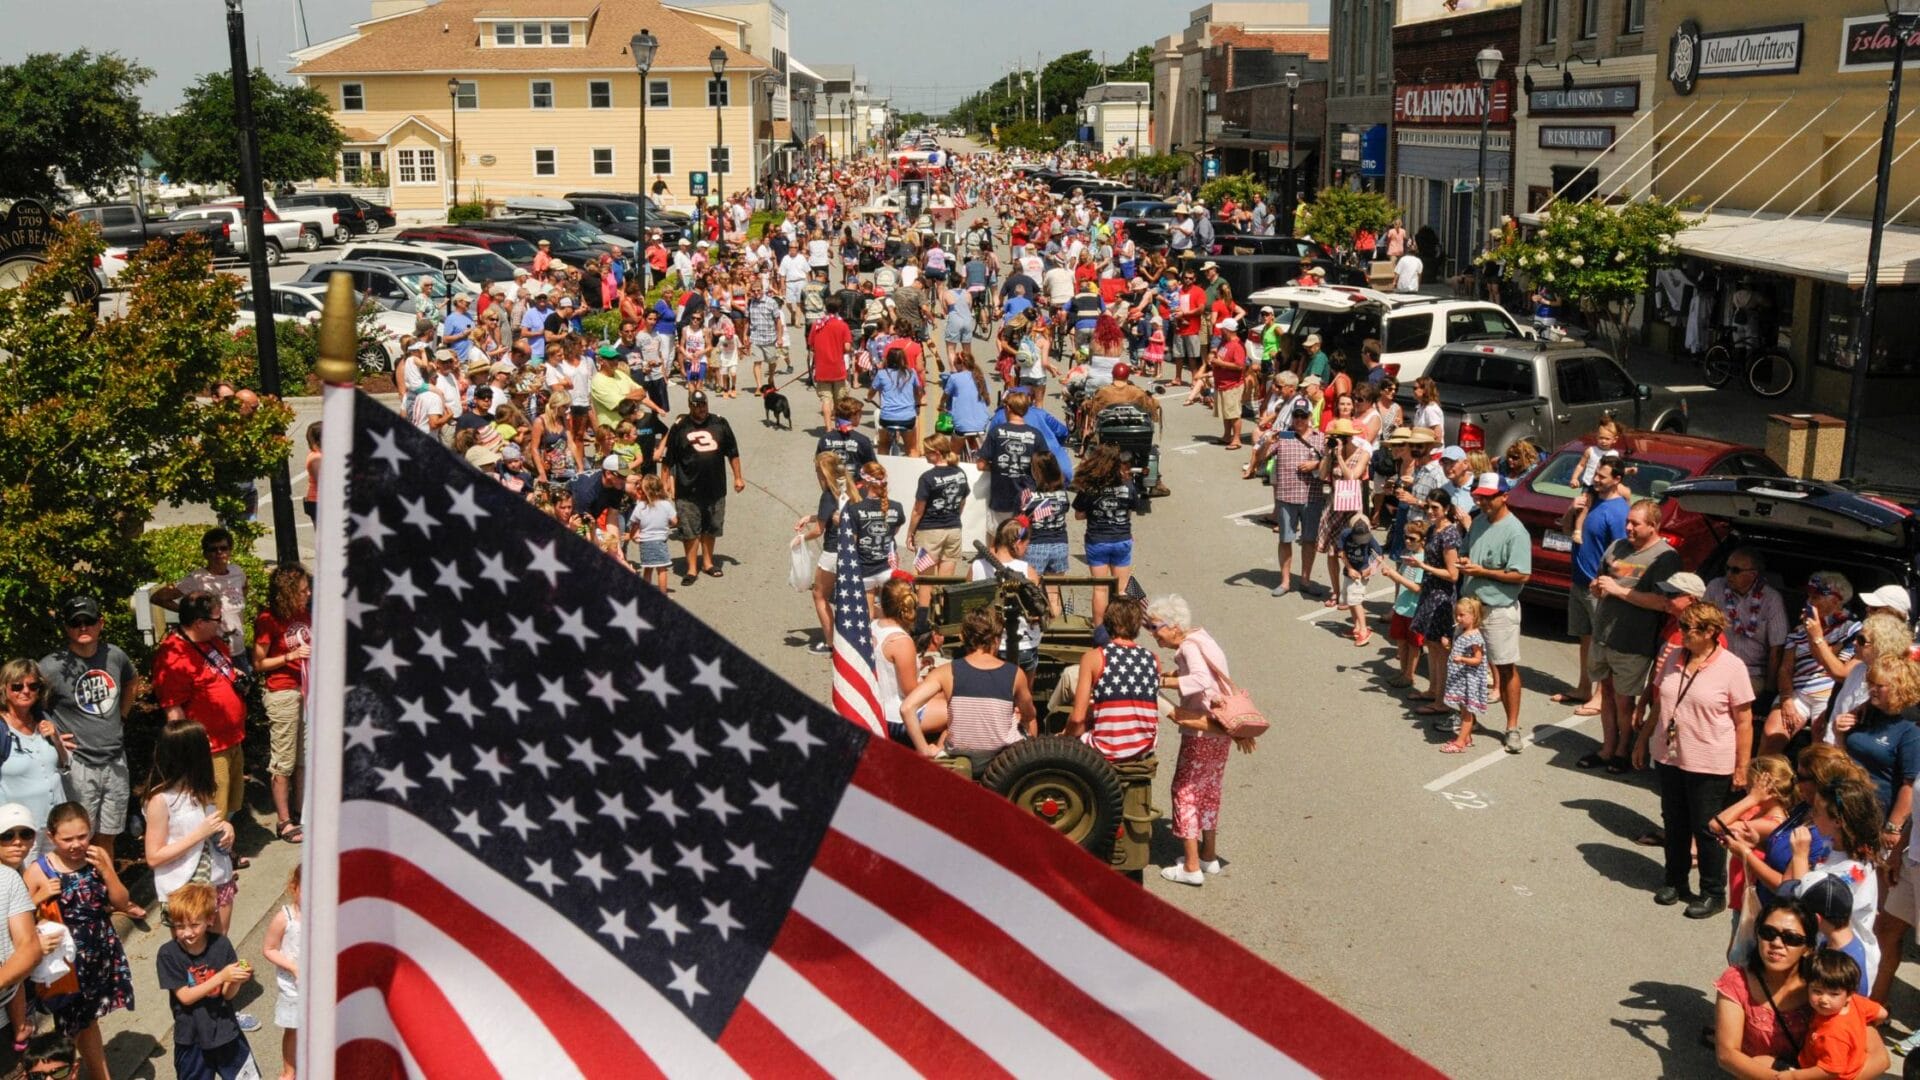 July 4th Parade - Events in Beaufort, NC